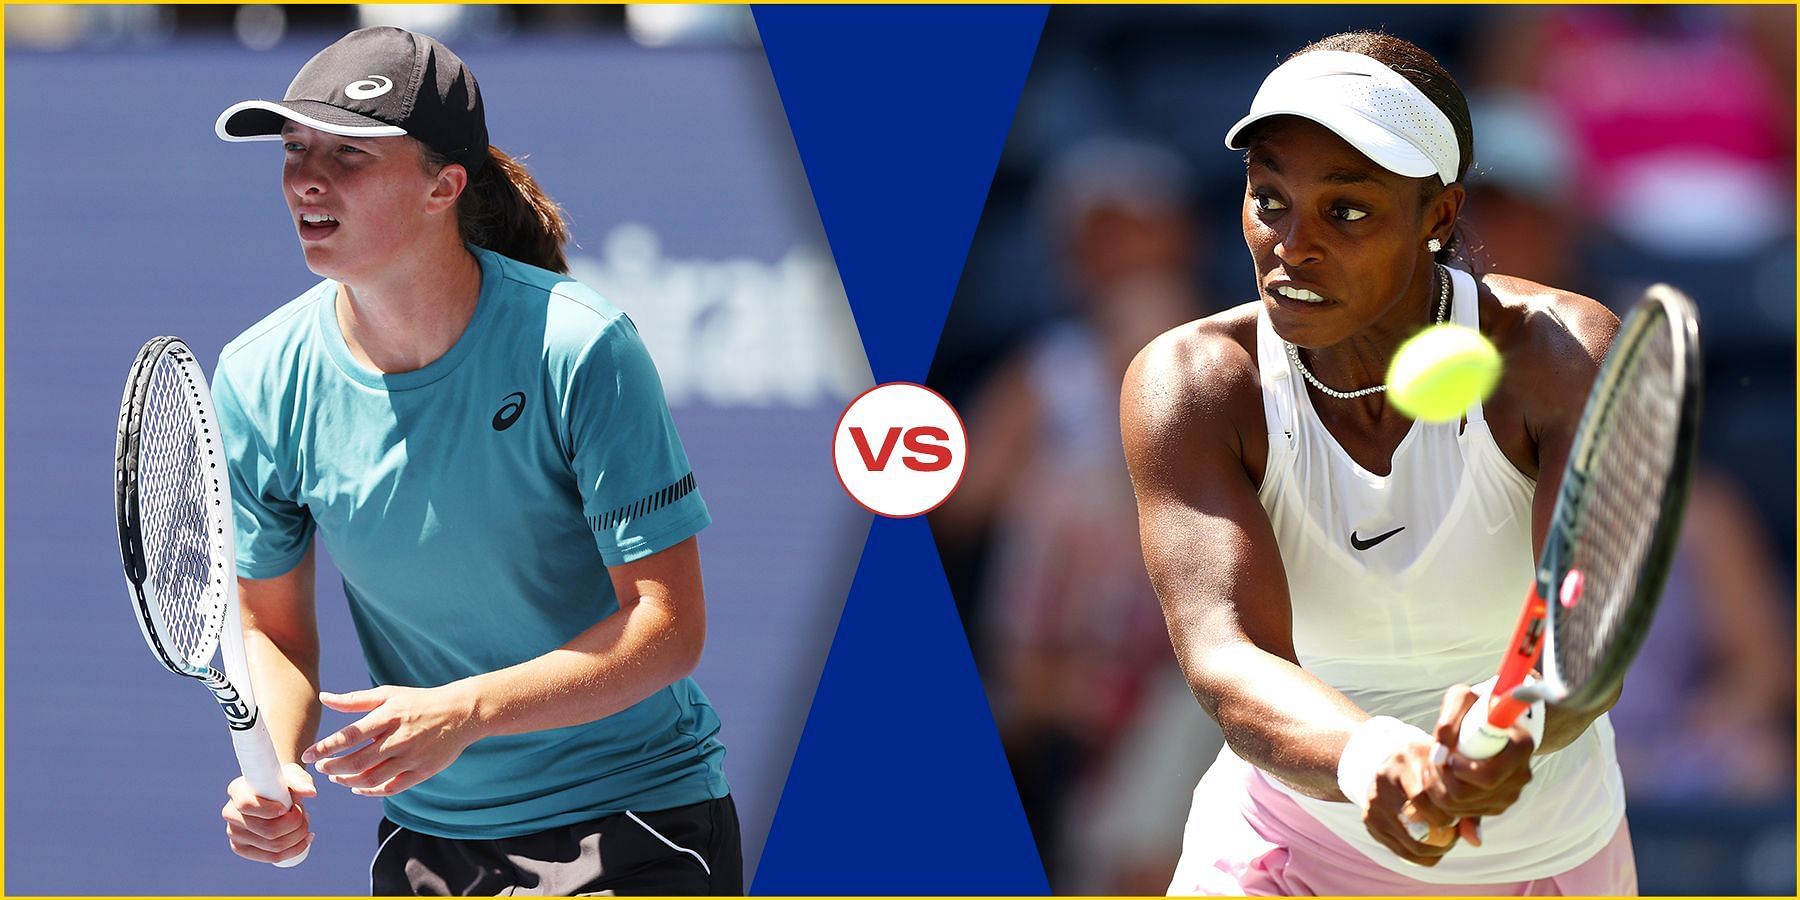 Swiatek and Stephens to meet in the second round of the 2022 US Open